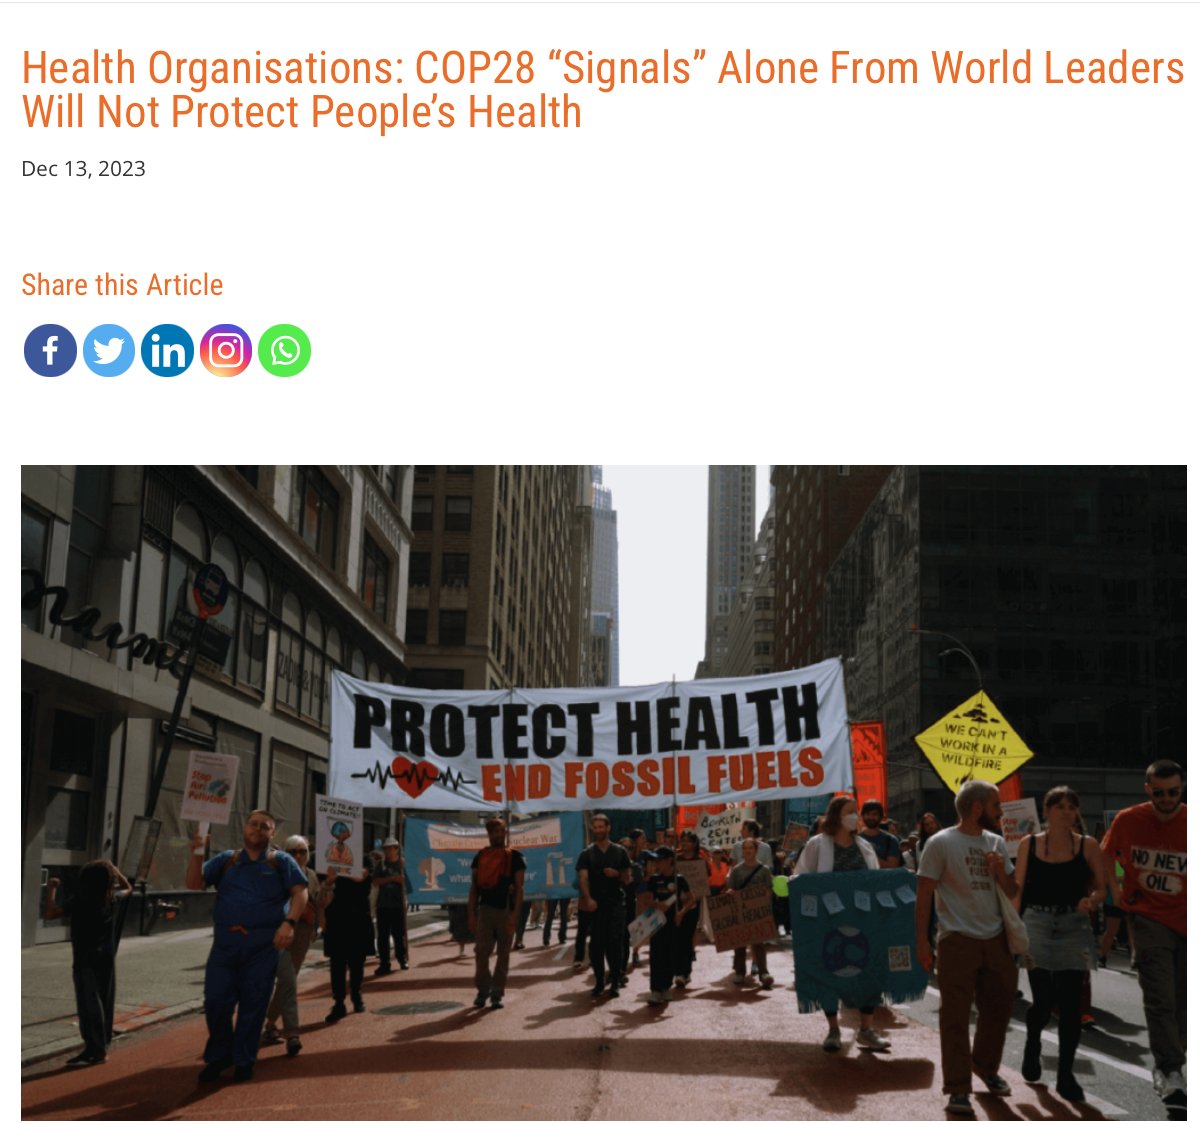 “Compromise may be part of intl. negotiations, but #COP28 deal won't matter for childrens’ lungs/brains/bodies if the air remains polluted & there isn't food on the table due to drought' @JeniMiller 👉Only #FossilFuelPhaseOut will protect people’s #health bit.ly/COP28GCHAFinal